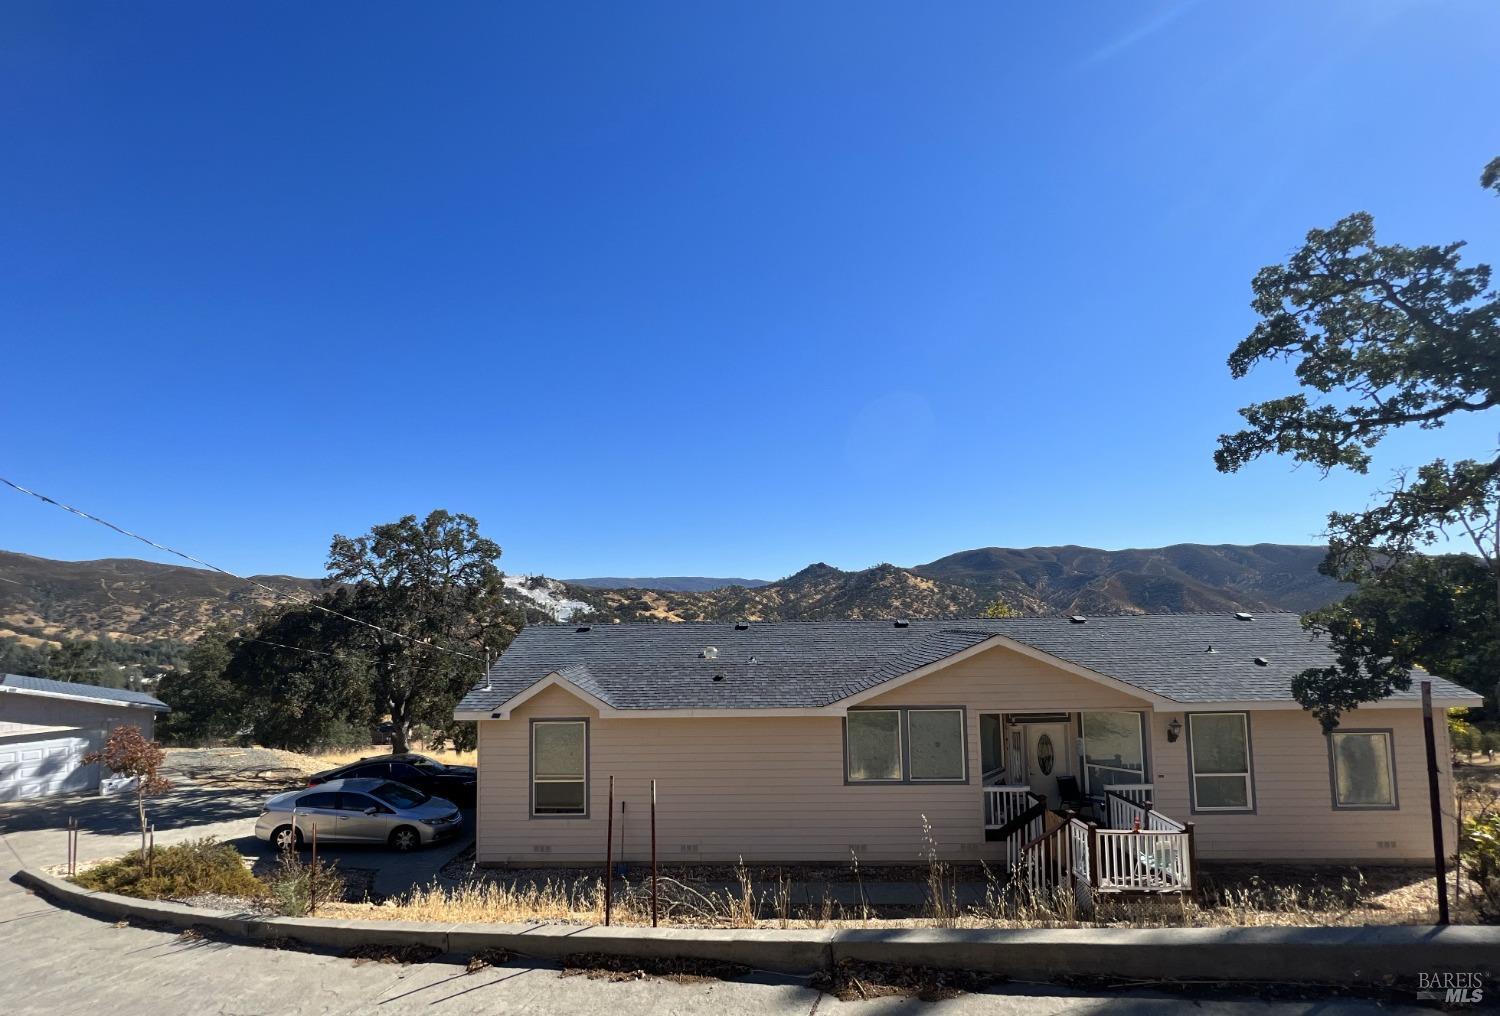 Photo of 2564 Indian Hill Rd in Clearlake Oaks, CA